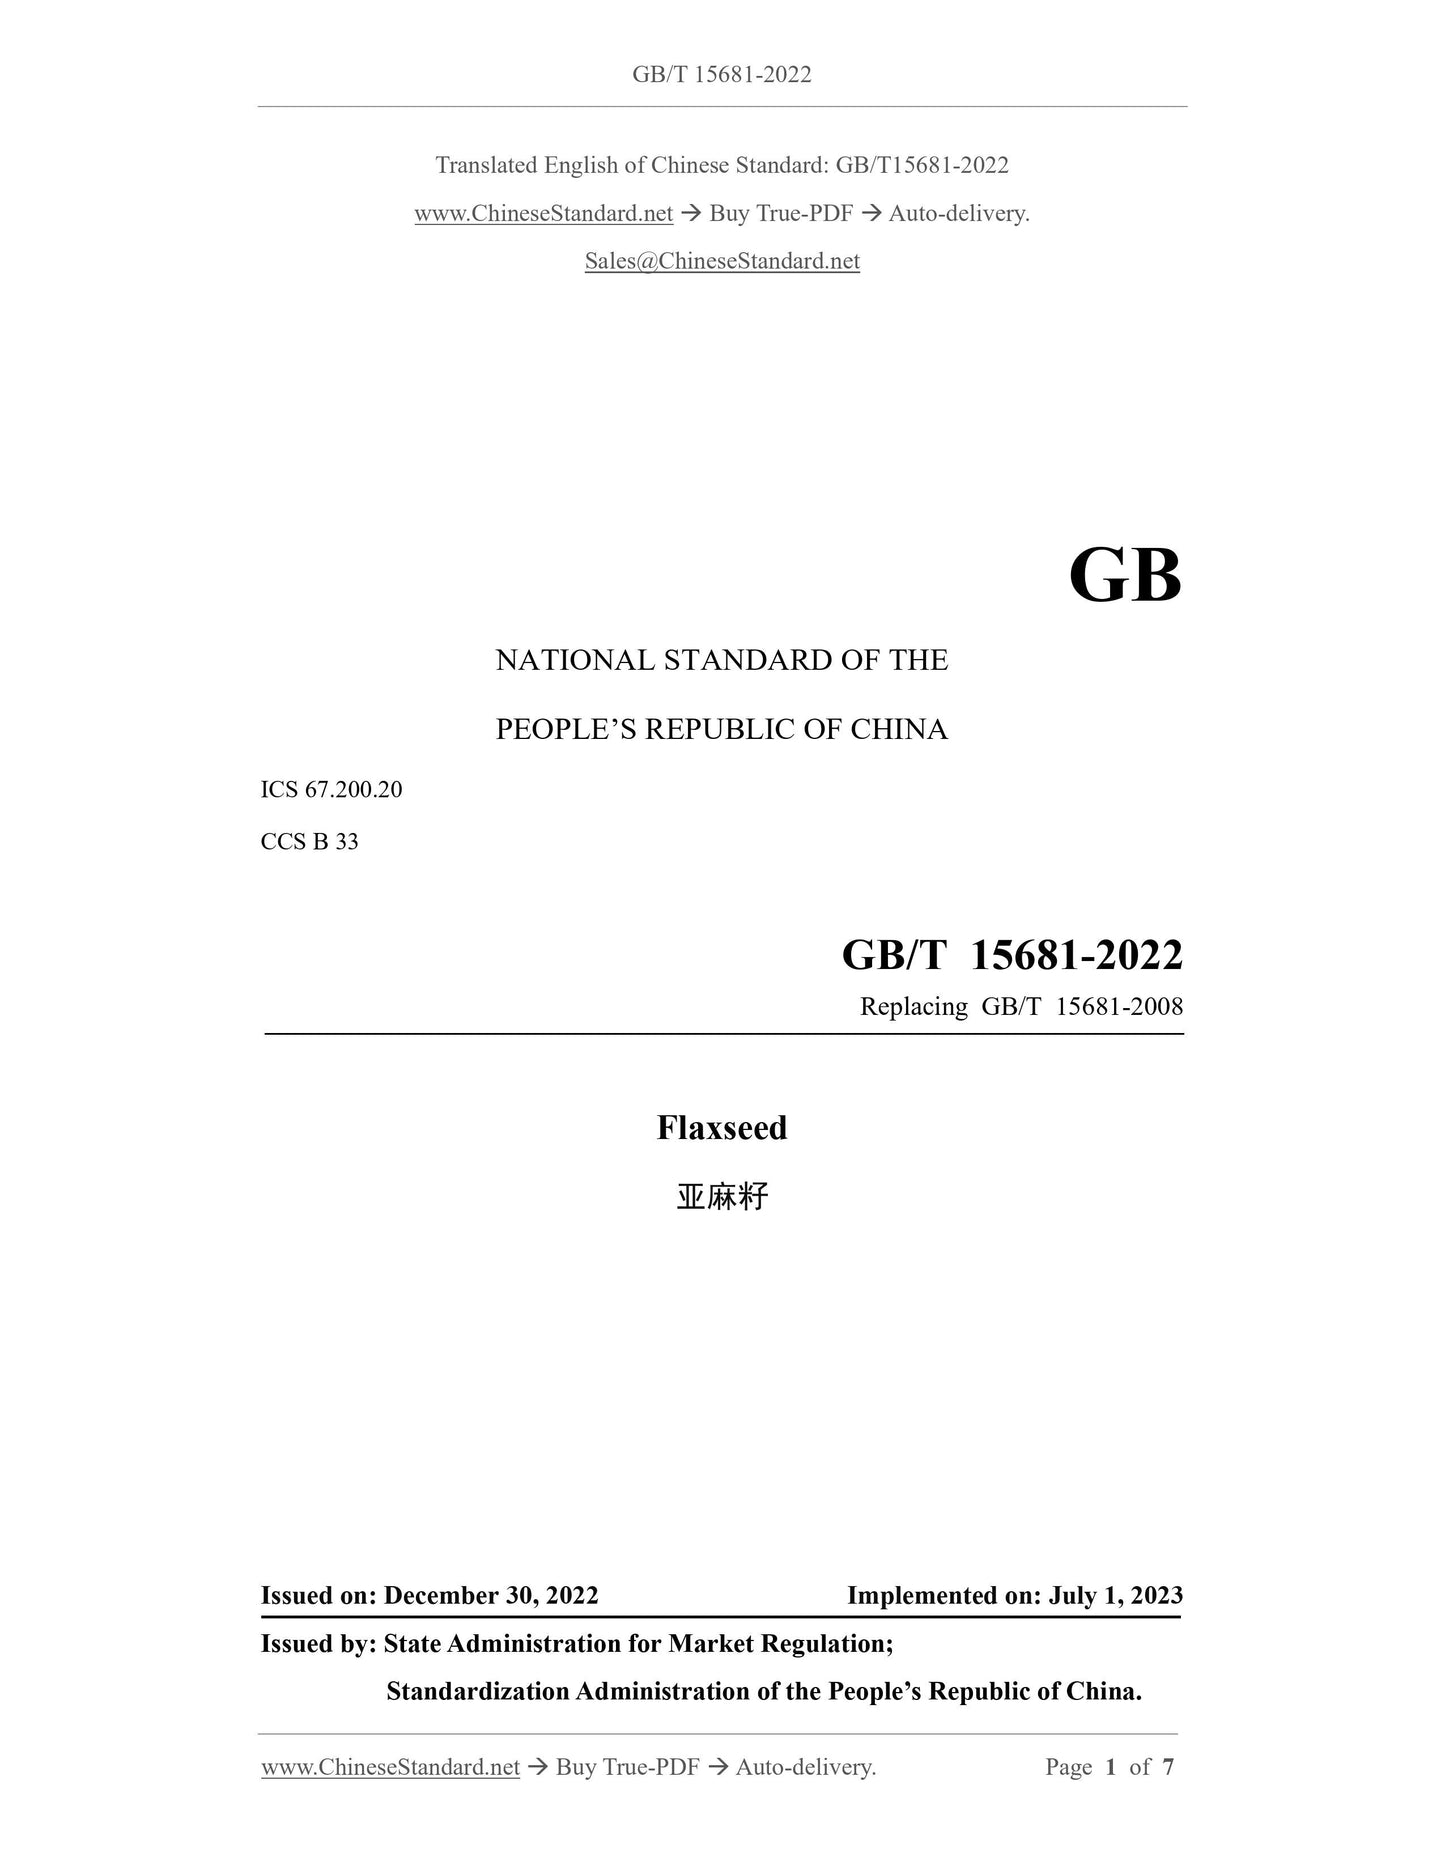 GB/T 15681-2022 Page 1